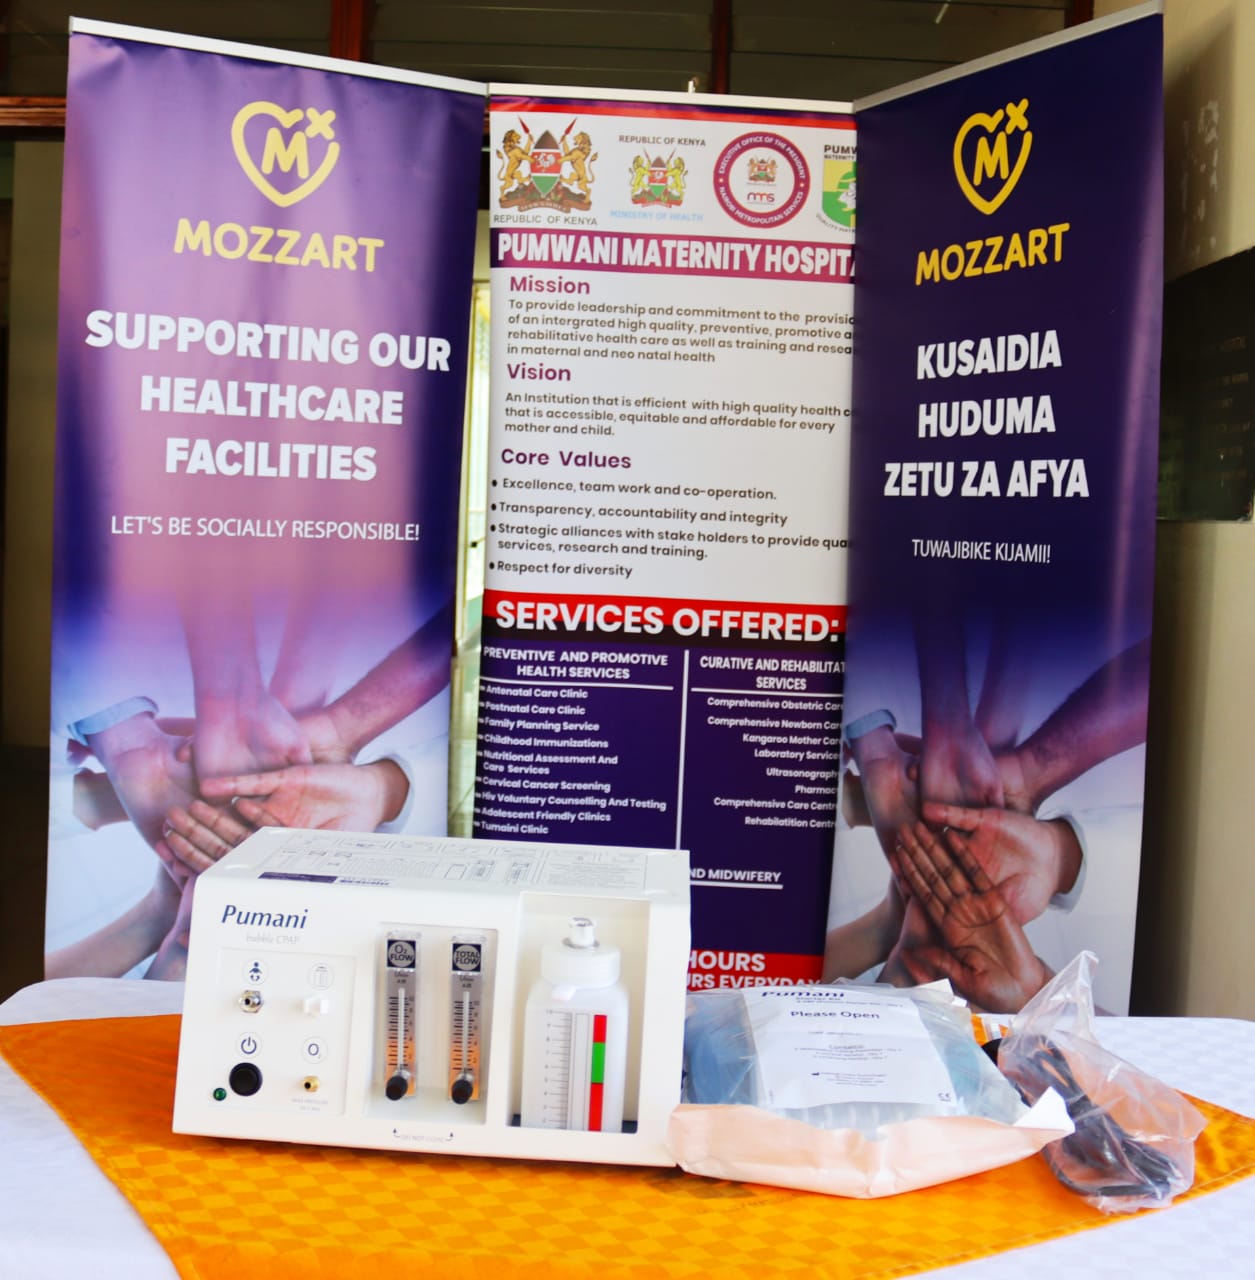 Mozzart fulfills promise to Pumwani Maternity Hospital by donating special medical equipment worth Ksh 400,000